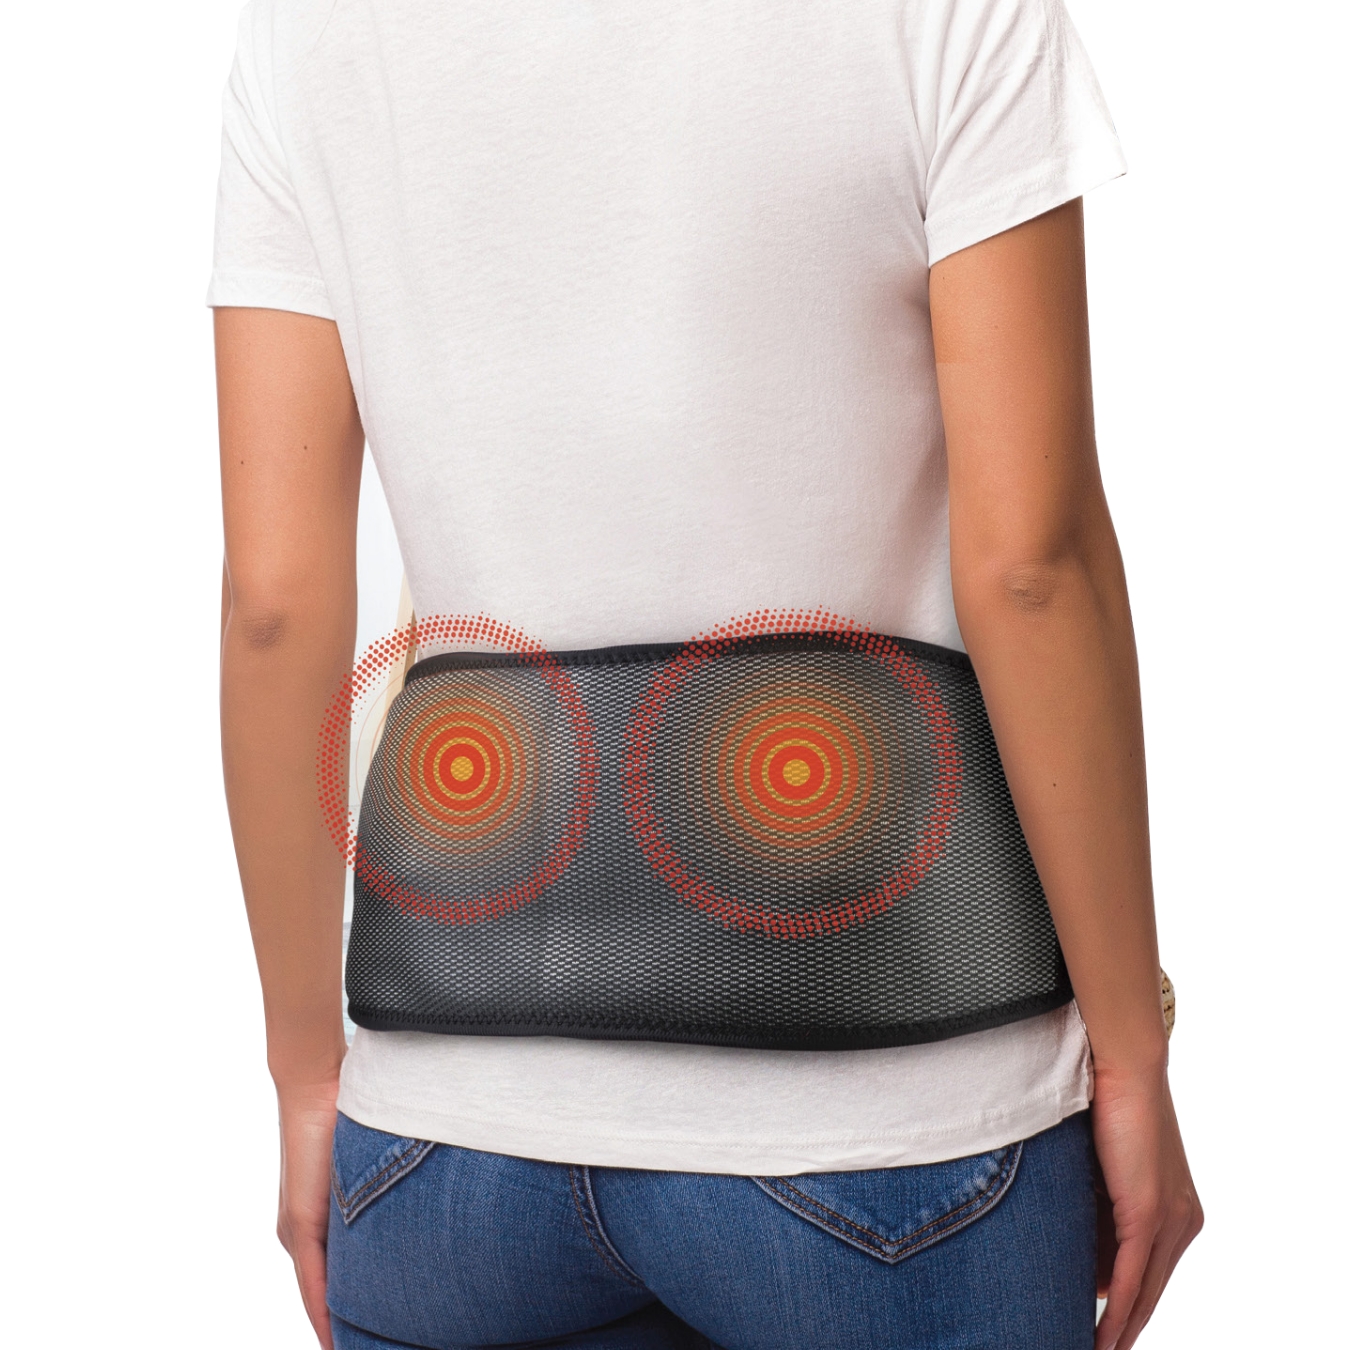 View HyImpact Heated Massage Belt With Air Pressure 3In1 Compression Belt High Street TV information